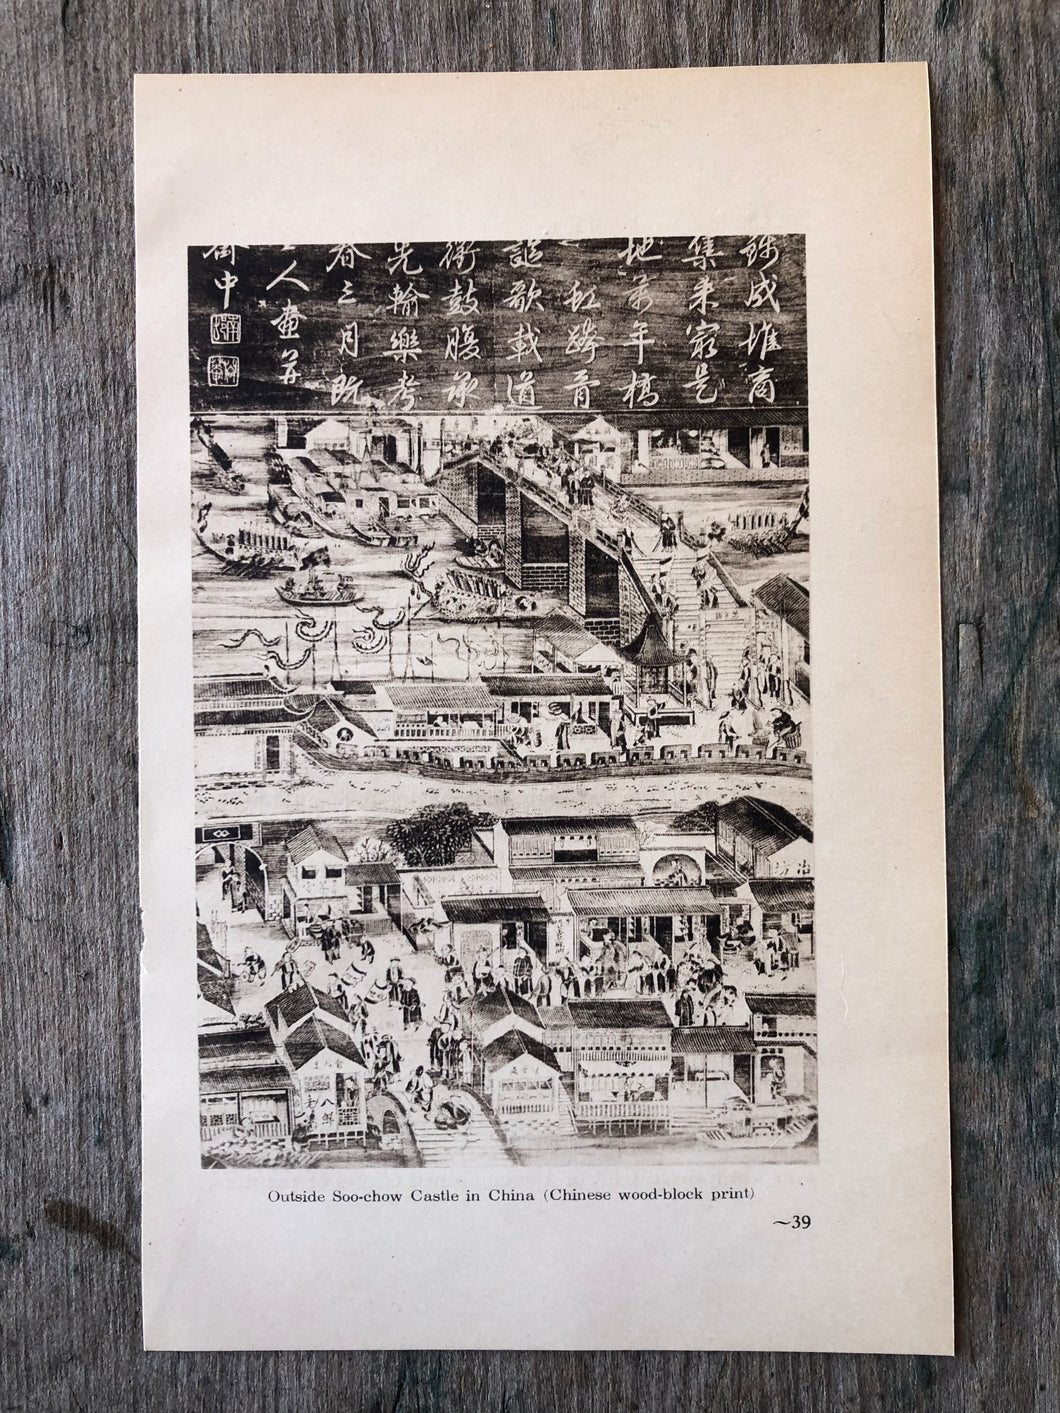 Print: Outside Soo-chow Castle in China (Chinese wood-block print).